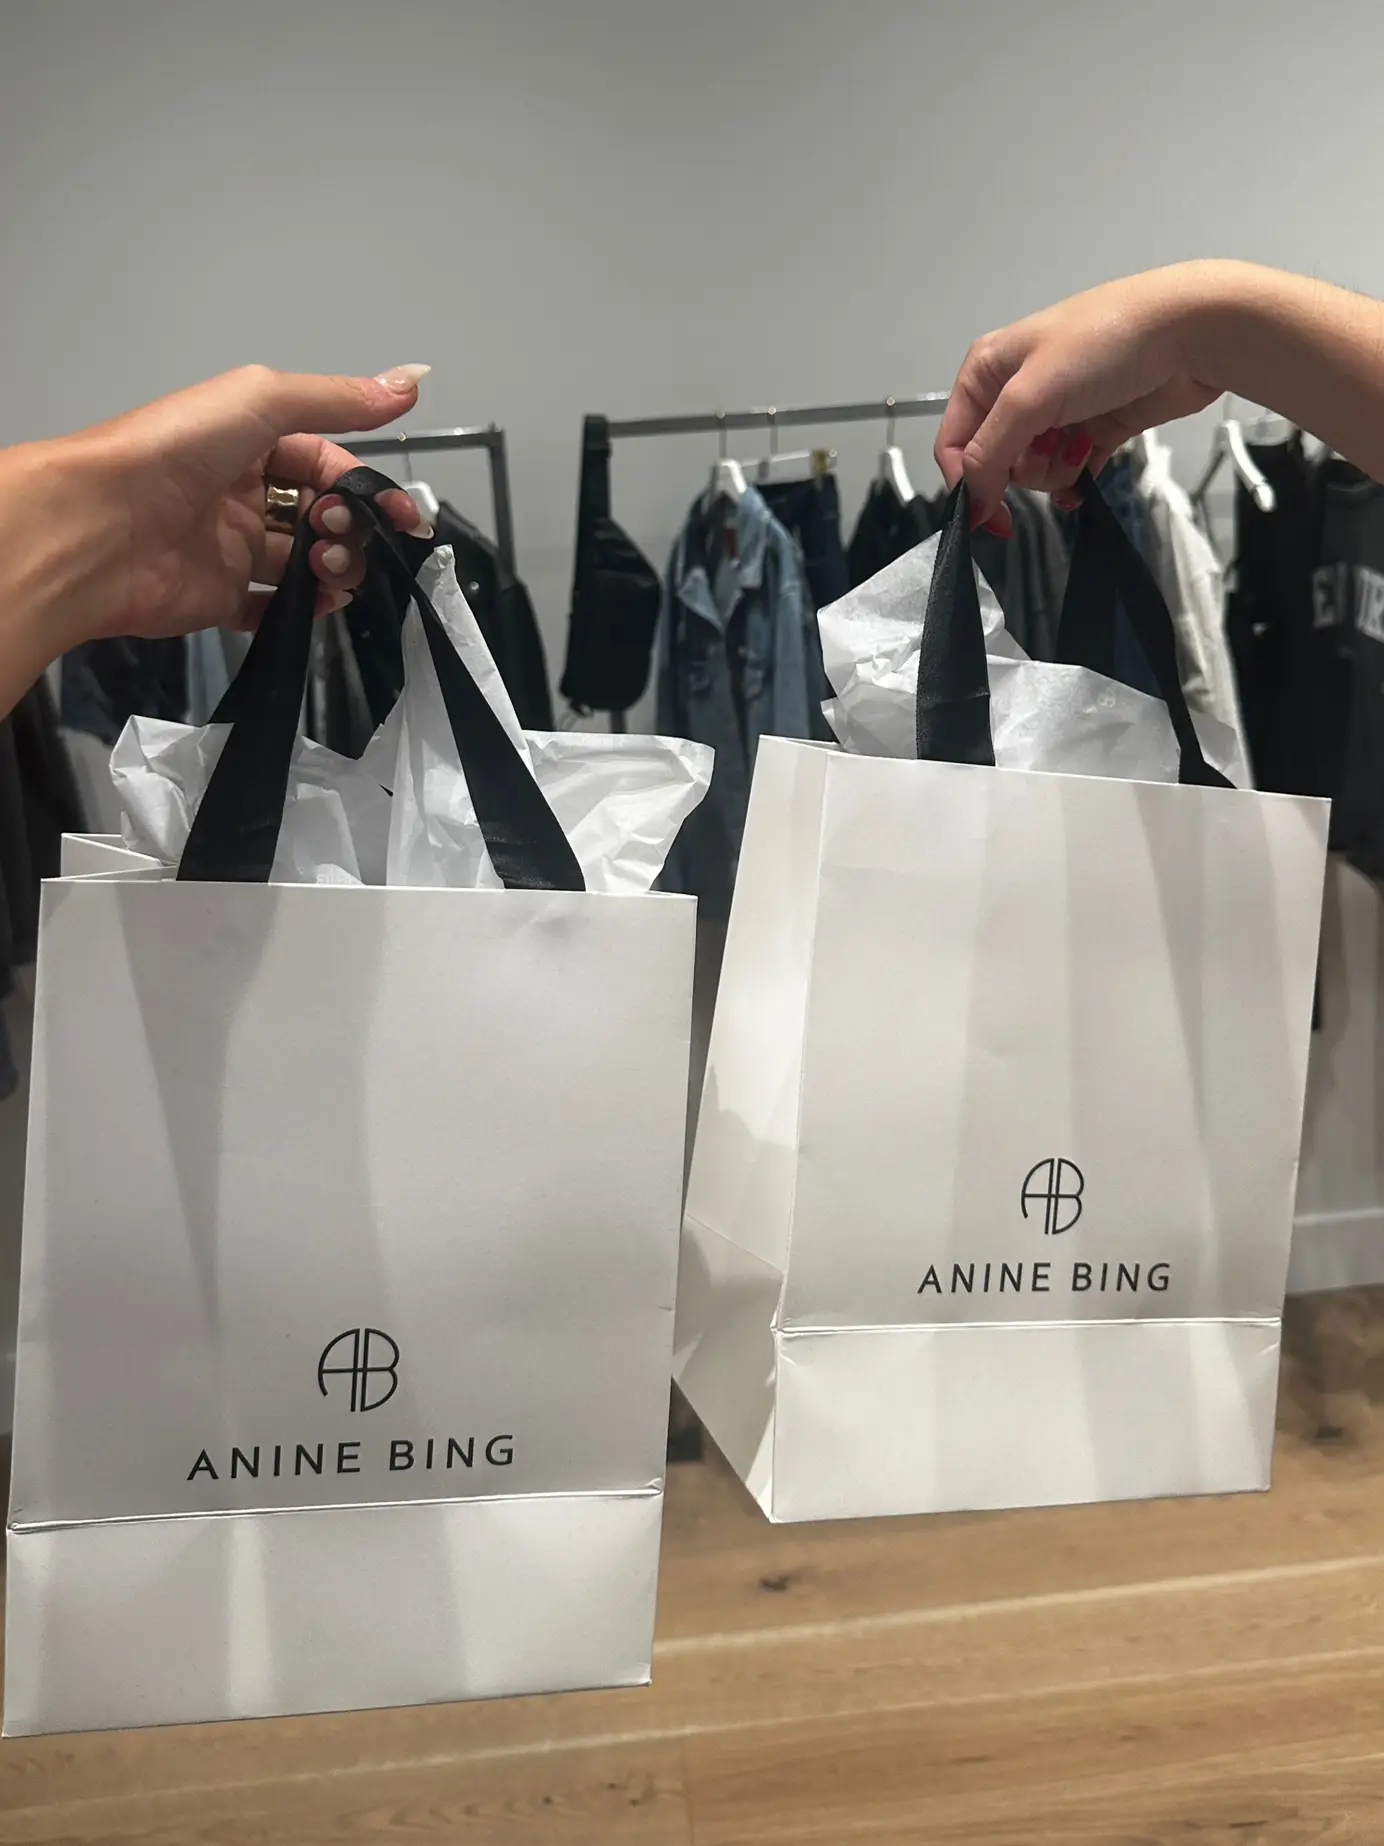 My business rules: Anine Bing